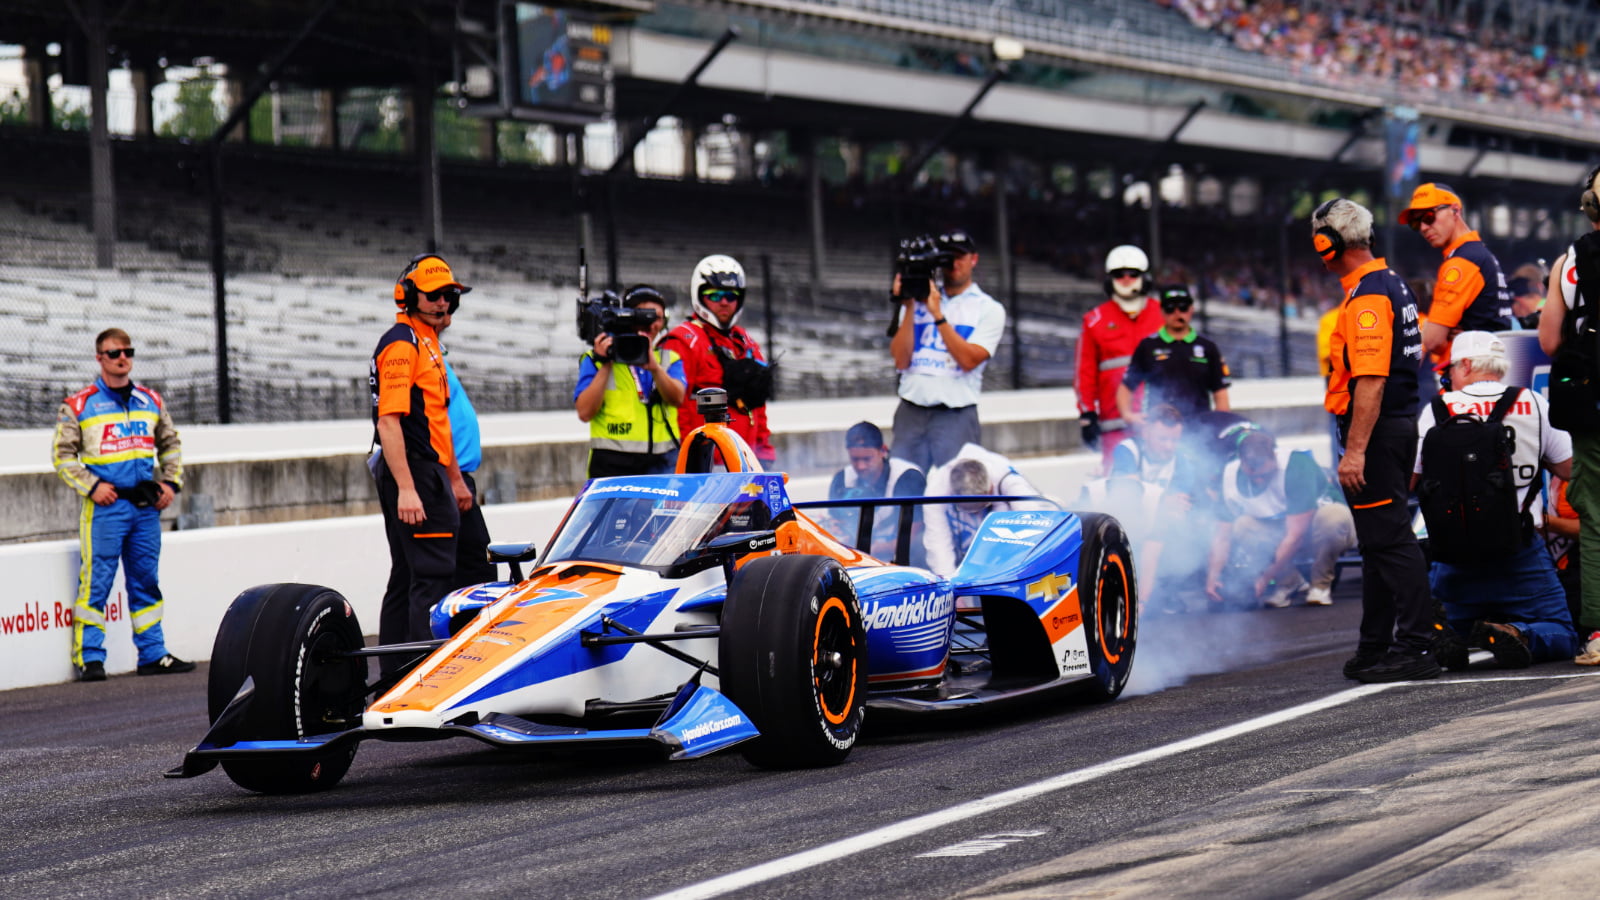 High Stakes and Heartbreak: VeeKay's Crash and McLaren's Struggle Rock Indy 500 Qualifying